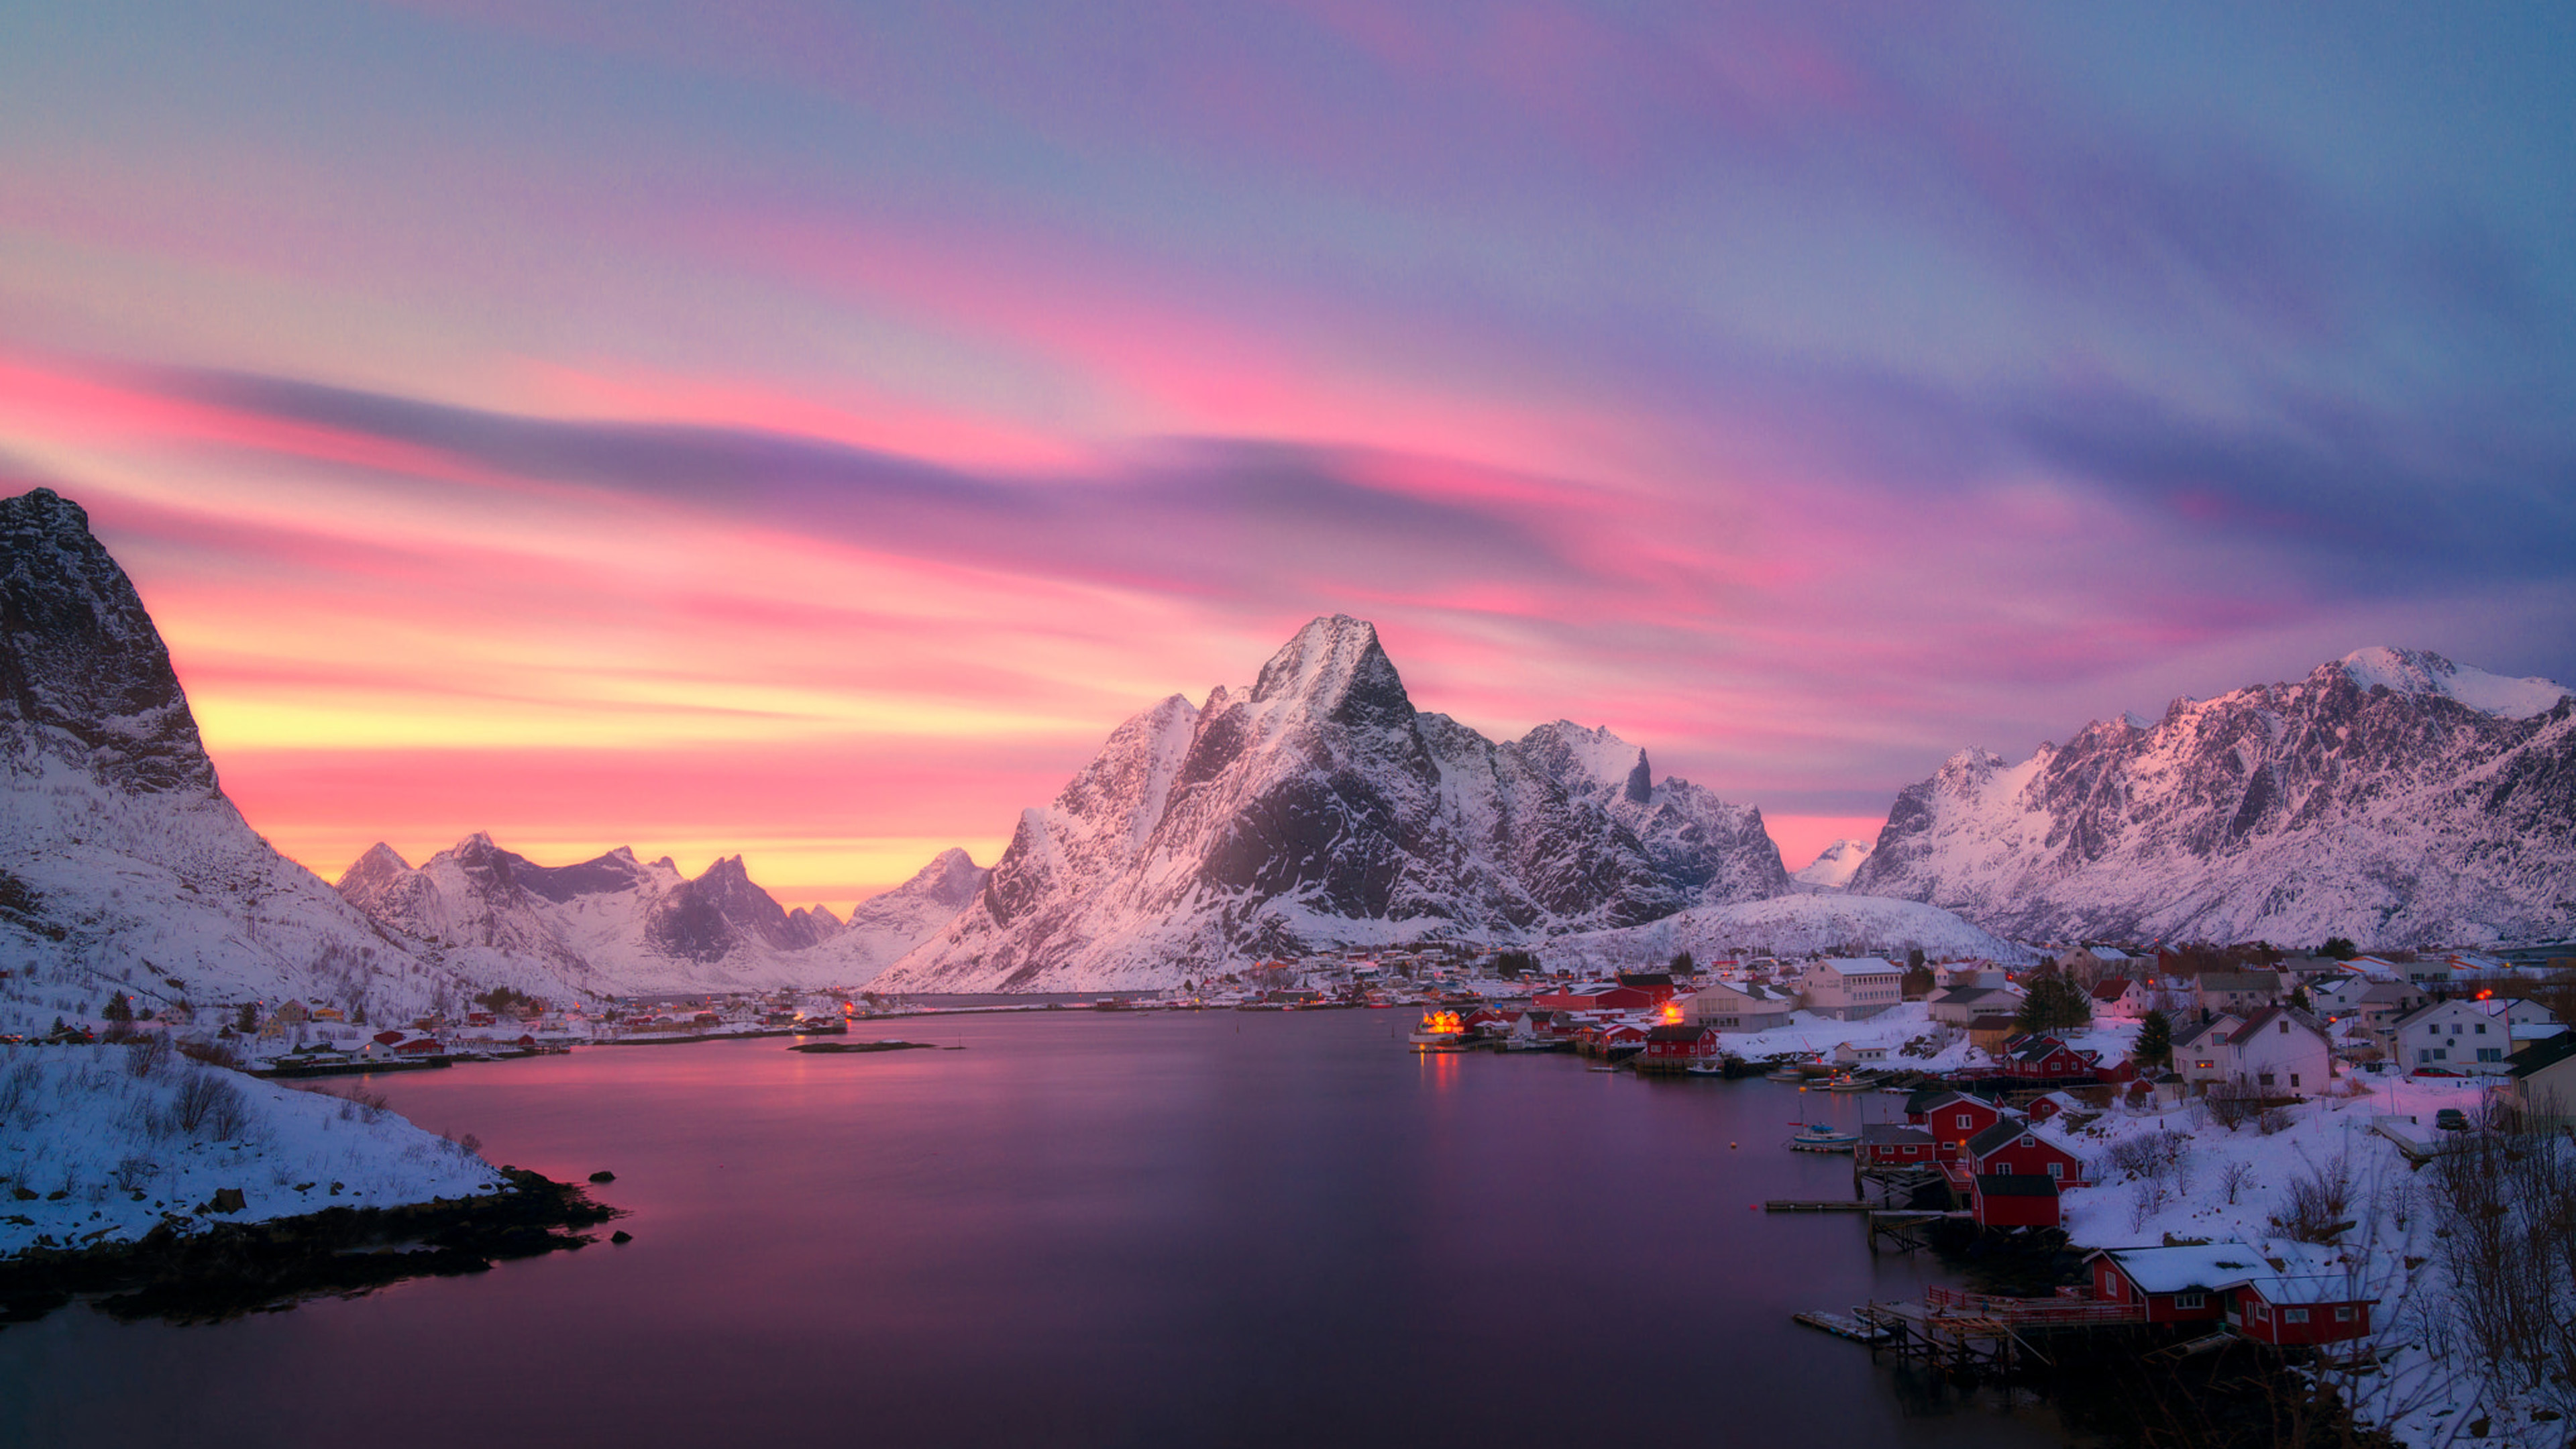 Lofoten Norway The Fishing Village Of Reine At Dusk Hd Wallpapers For Tablets Mobile Phones